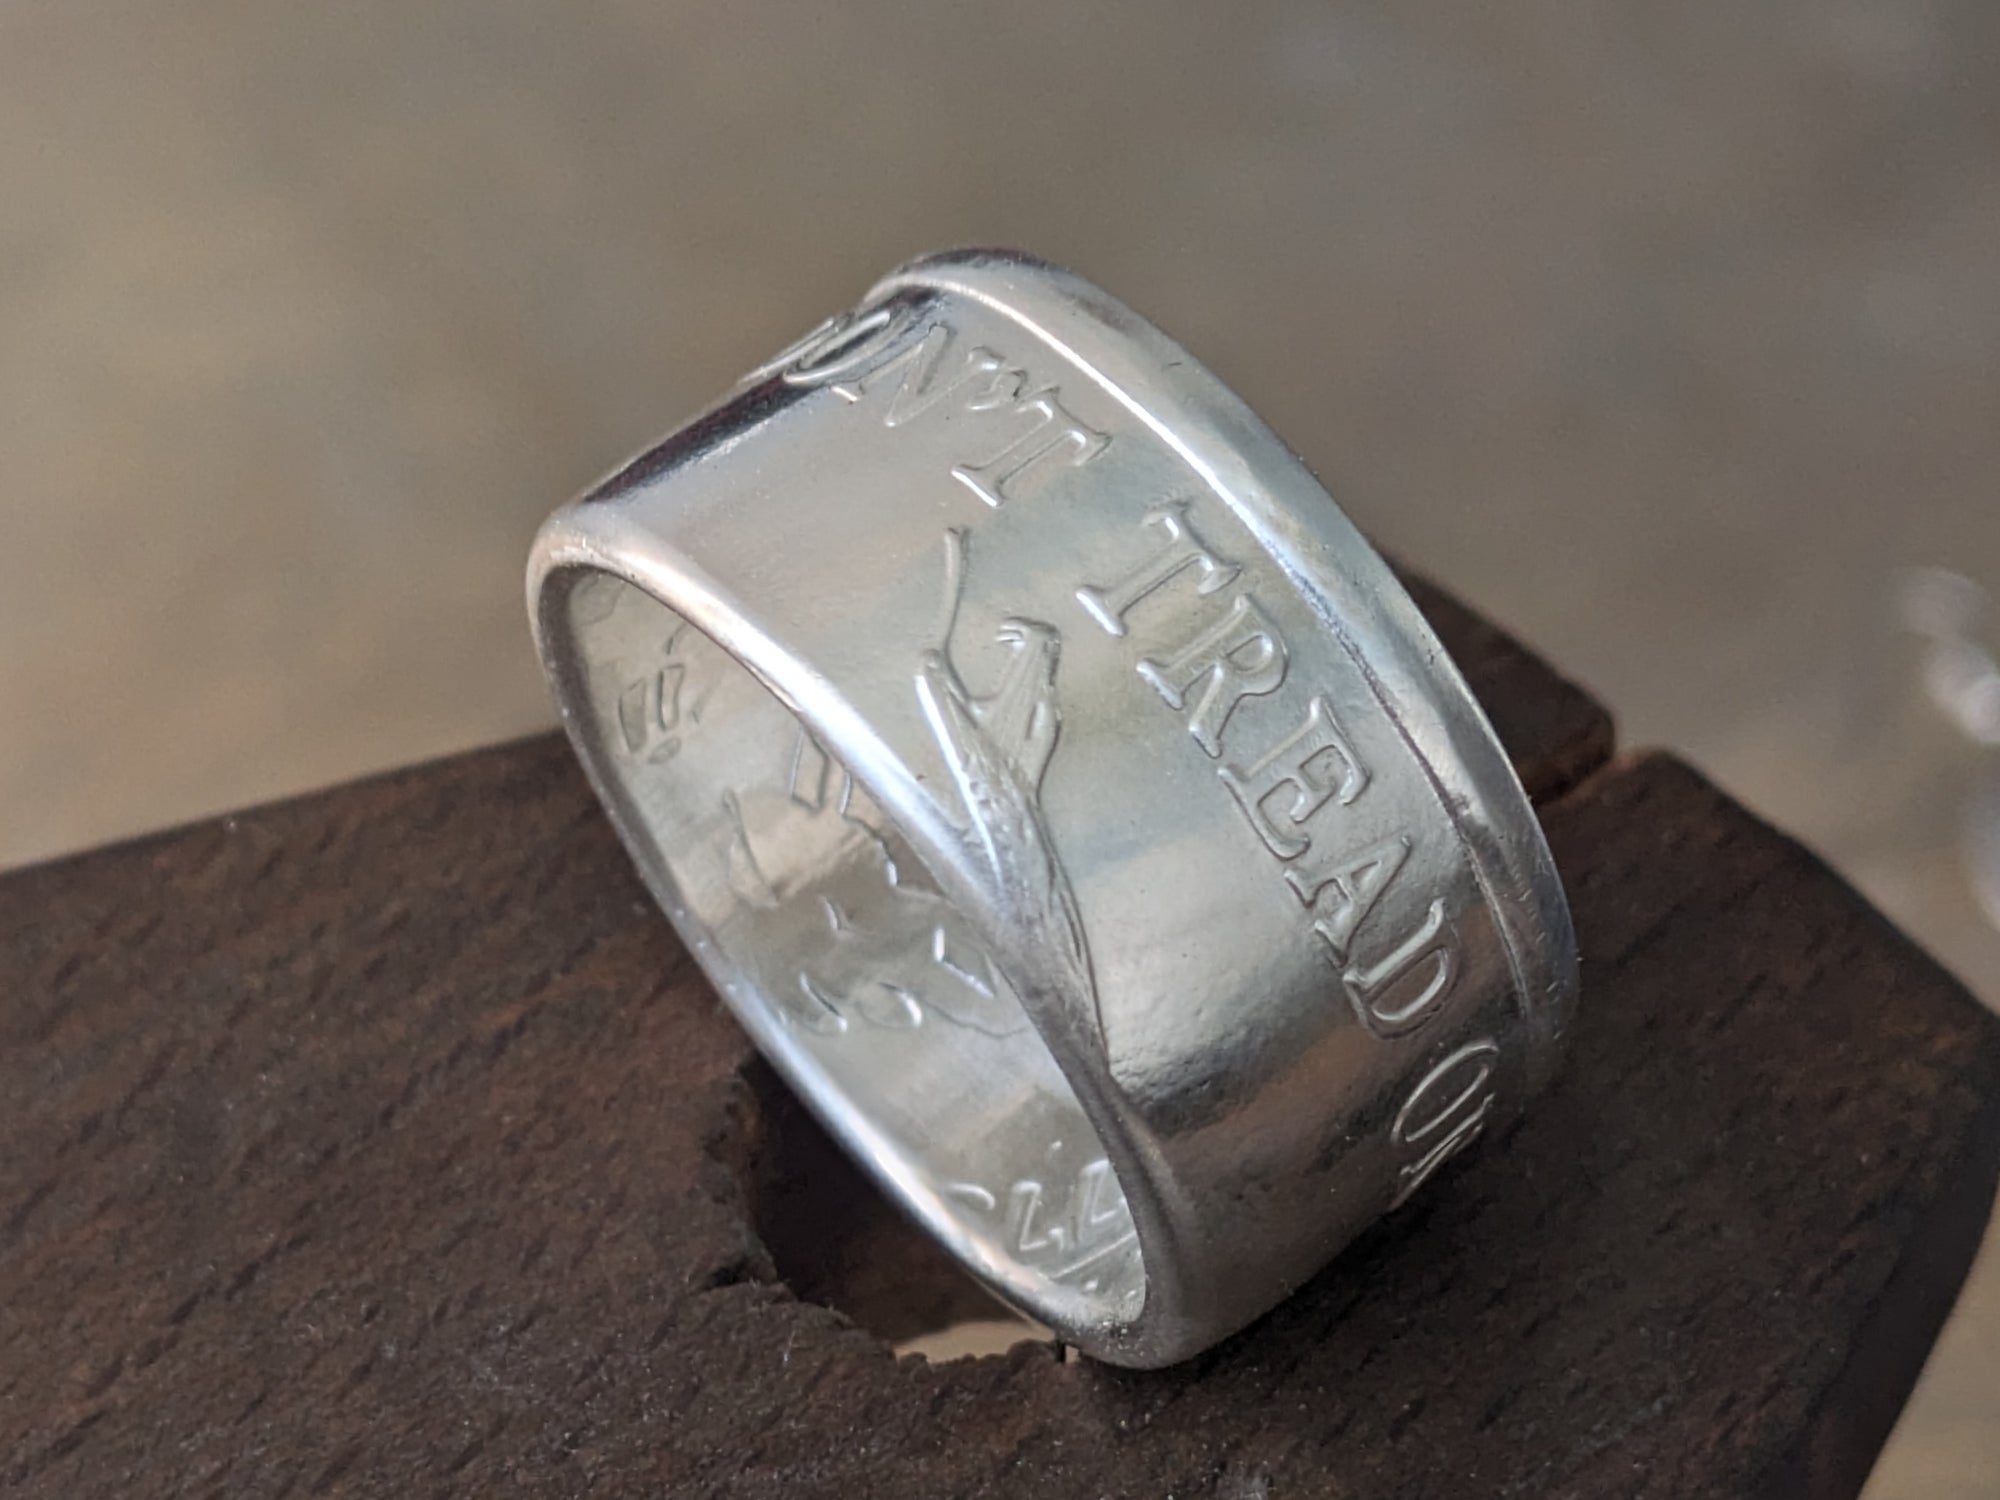 Gadsden Flag/Don't Tread On Me Silver Coin Ring